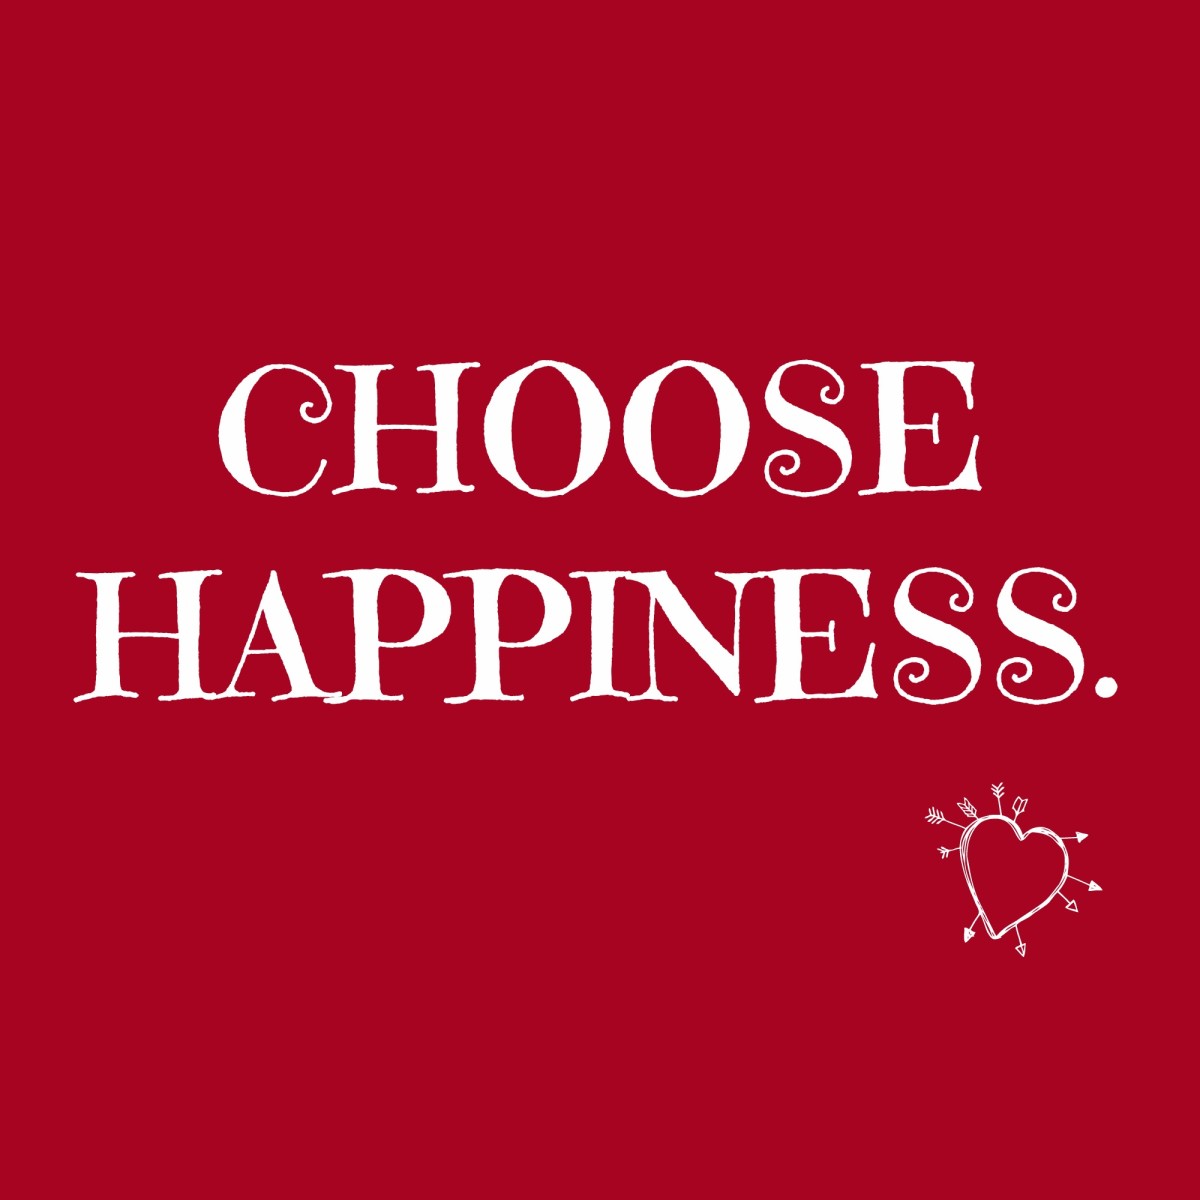 Happiness is a choice only you can make